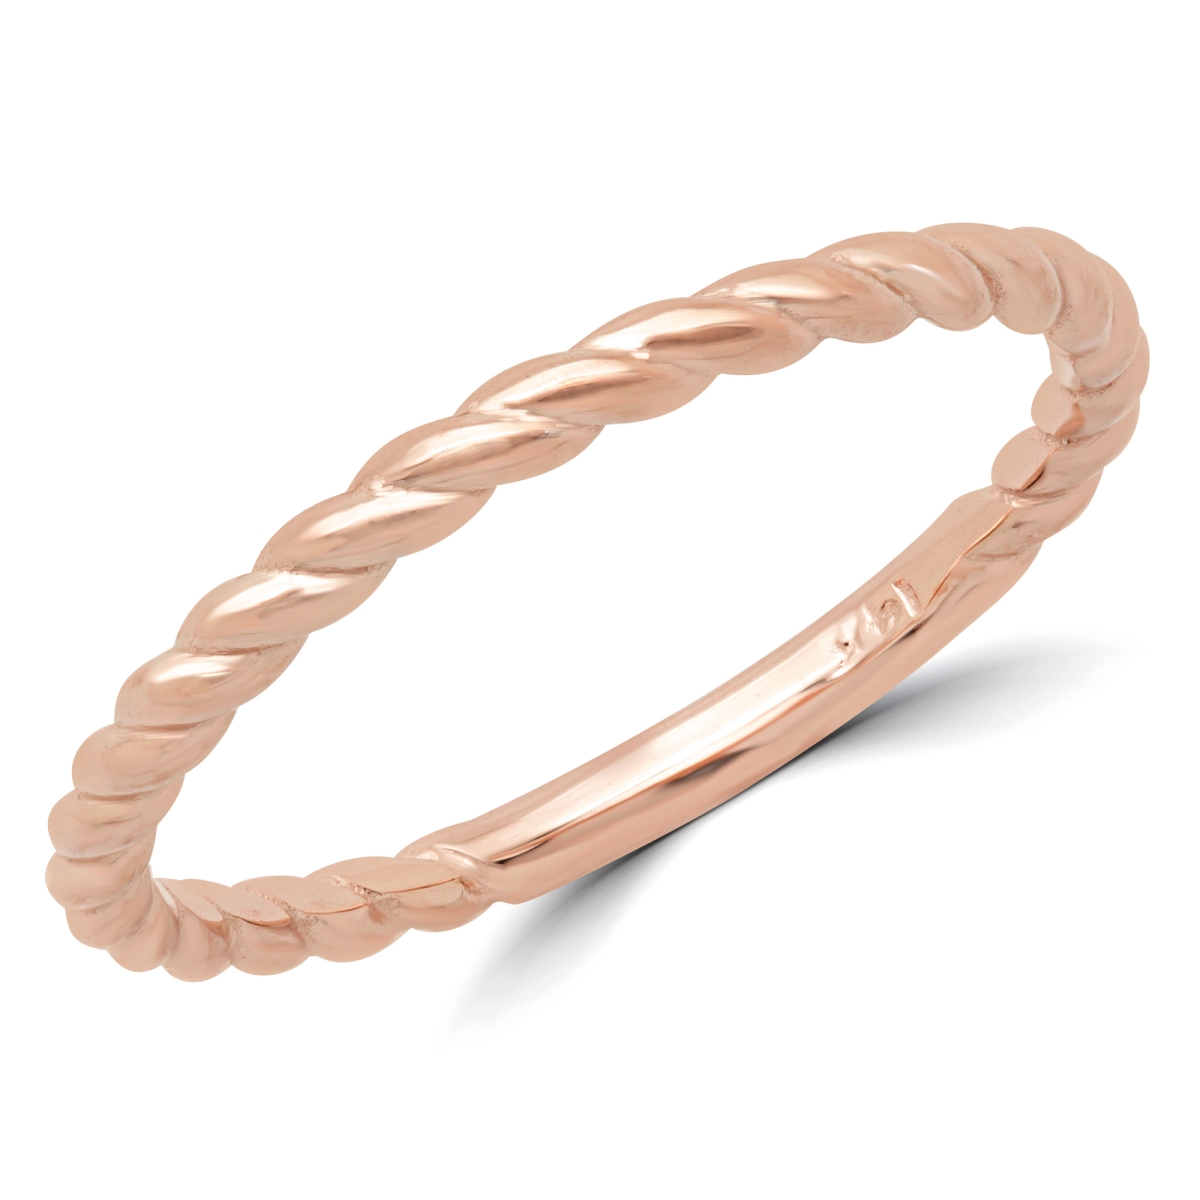 Picture of Majesty Diamonds MD180603-4.5 Braided Rope Classic Wedding Band Ring in 14K Rose Gold - Size 4.5